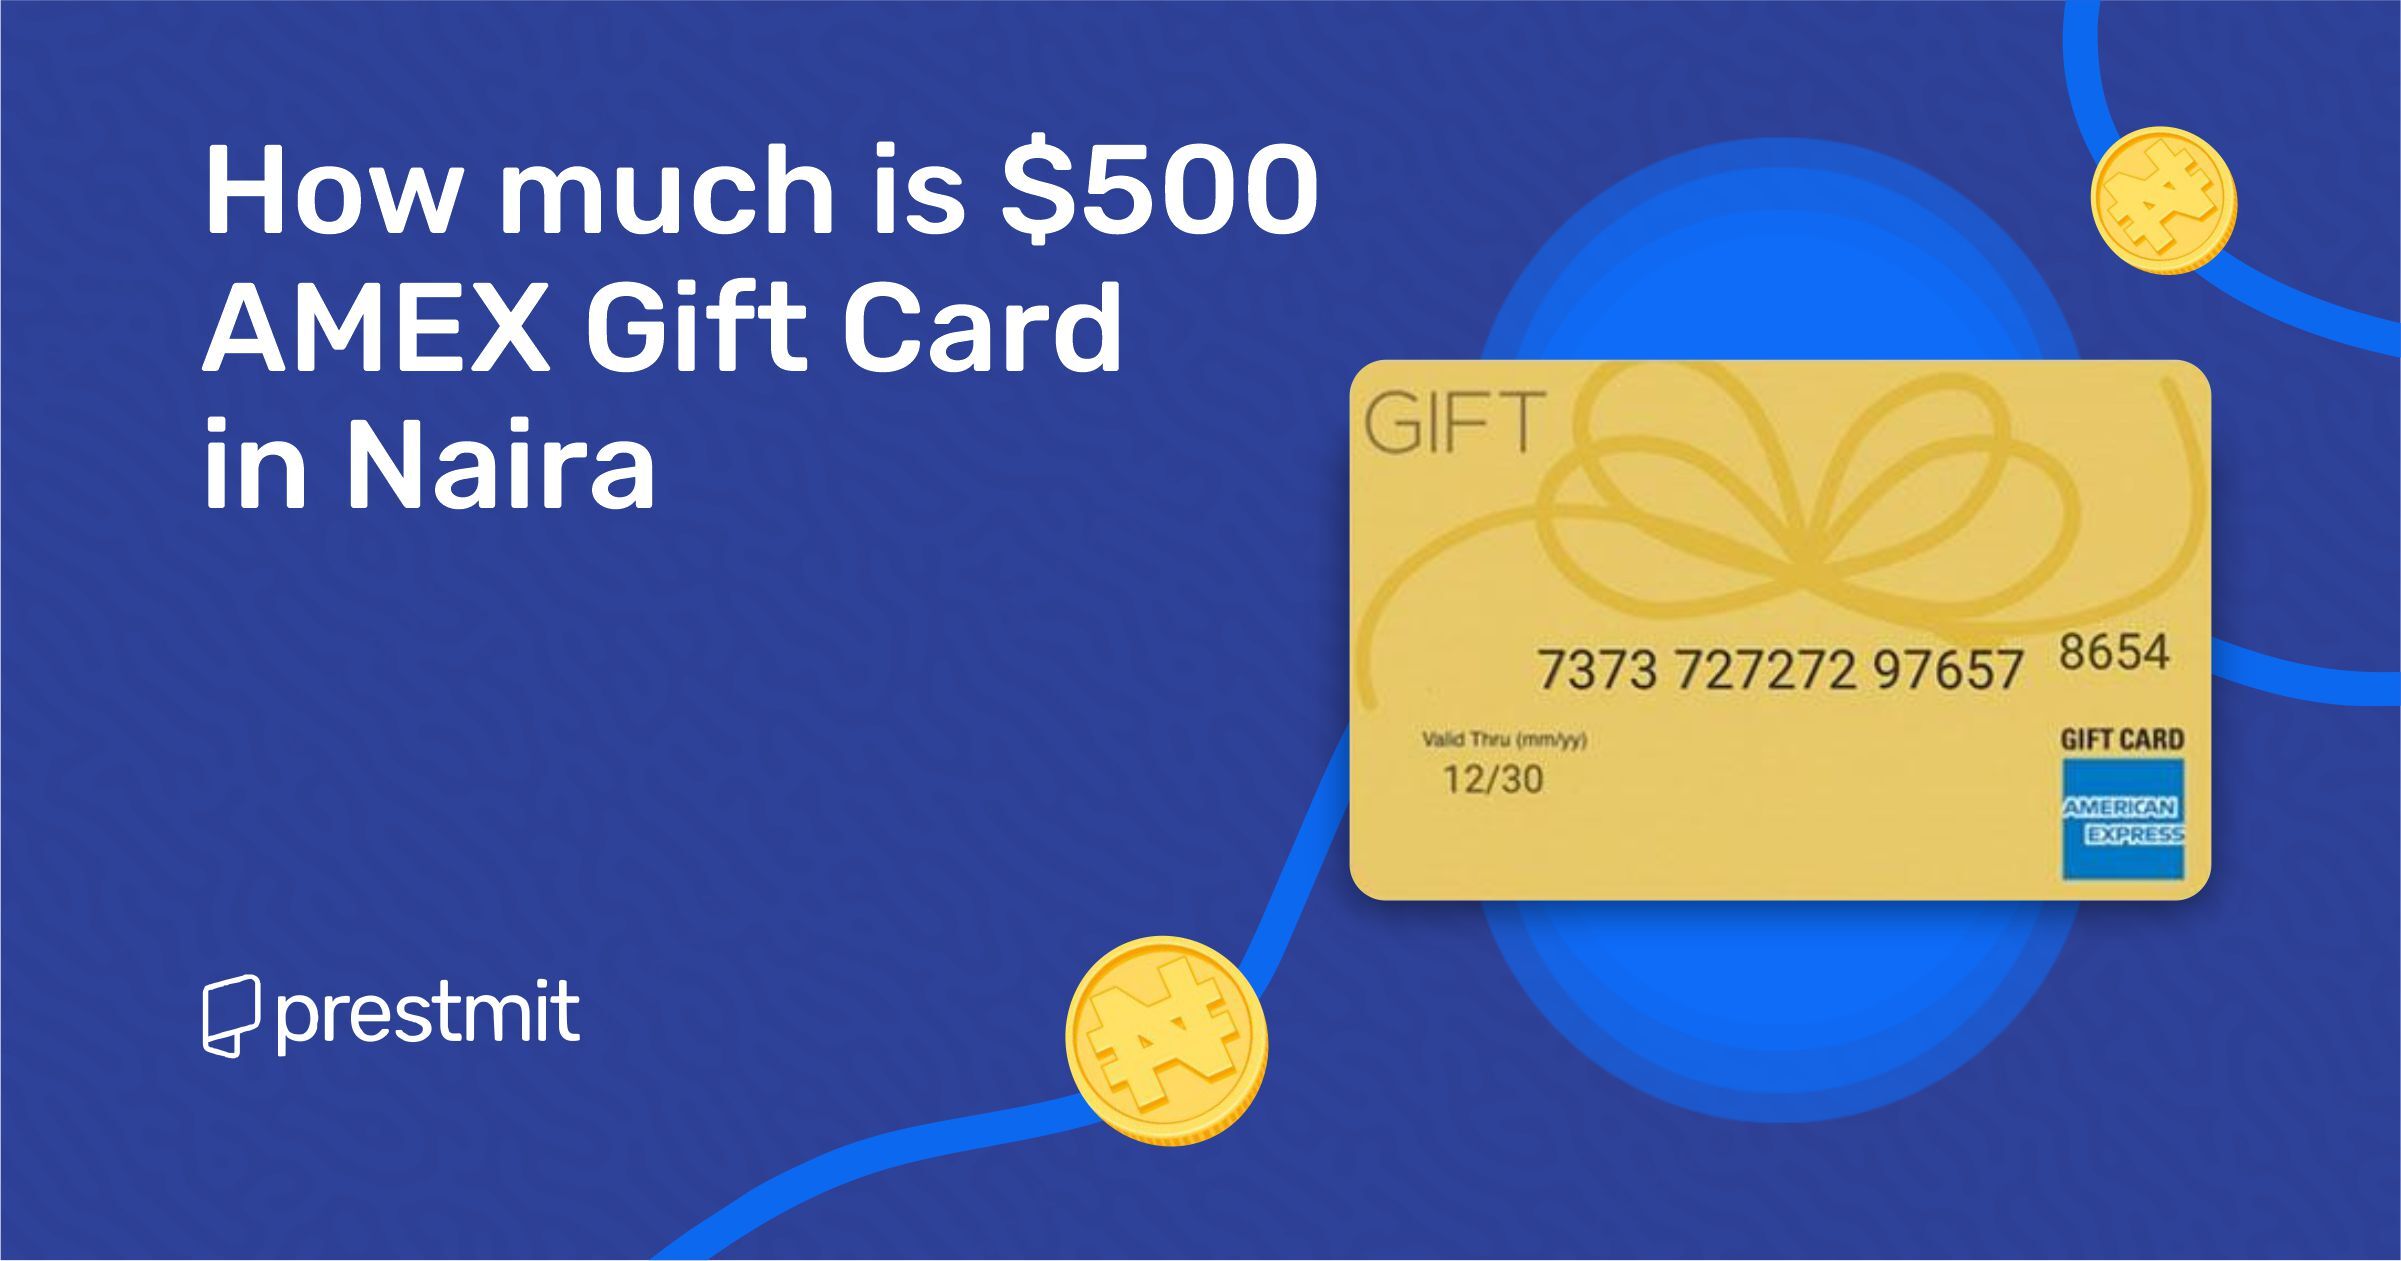 Buy roblox gift card Online With Best Price, Dec 2023